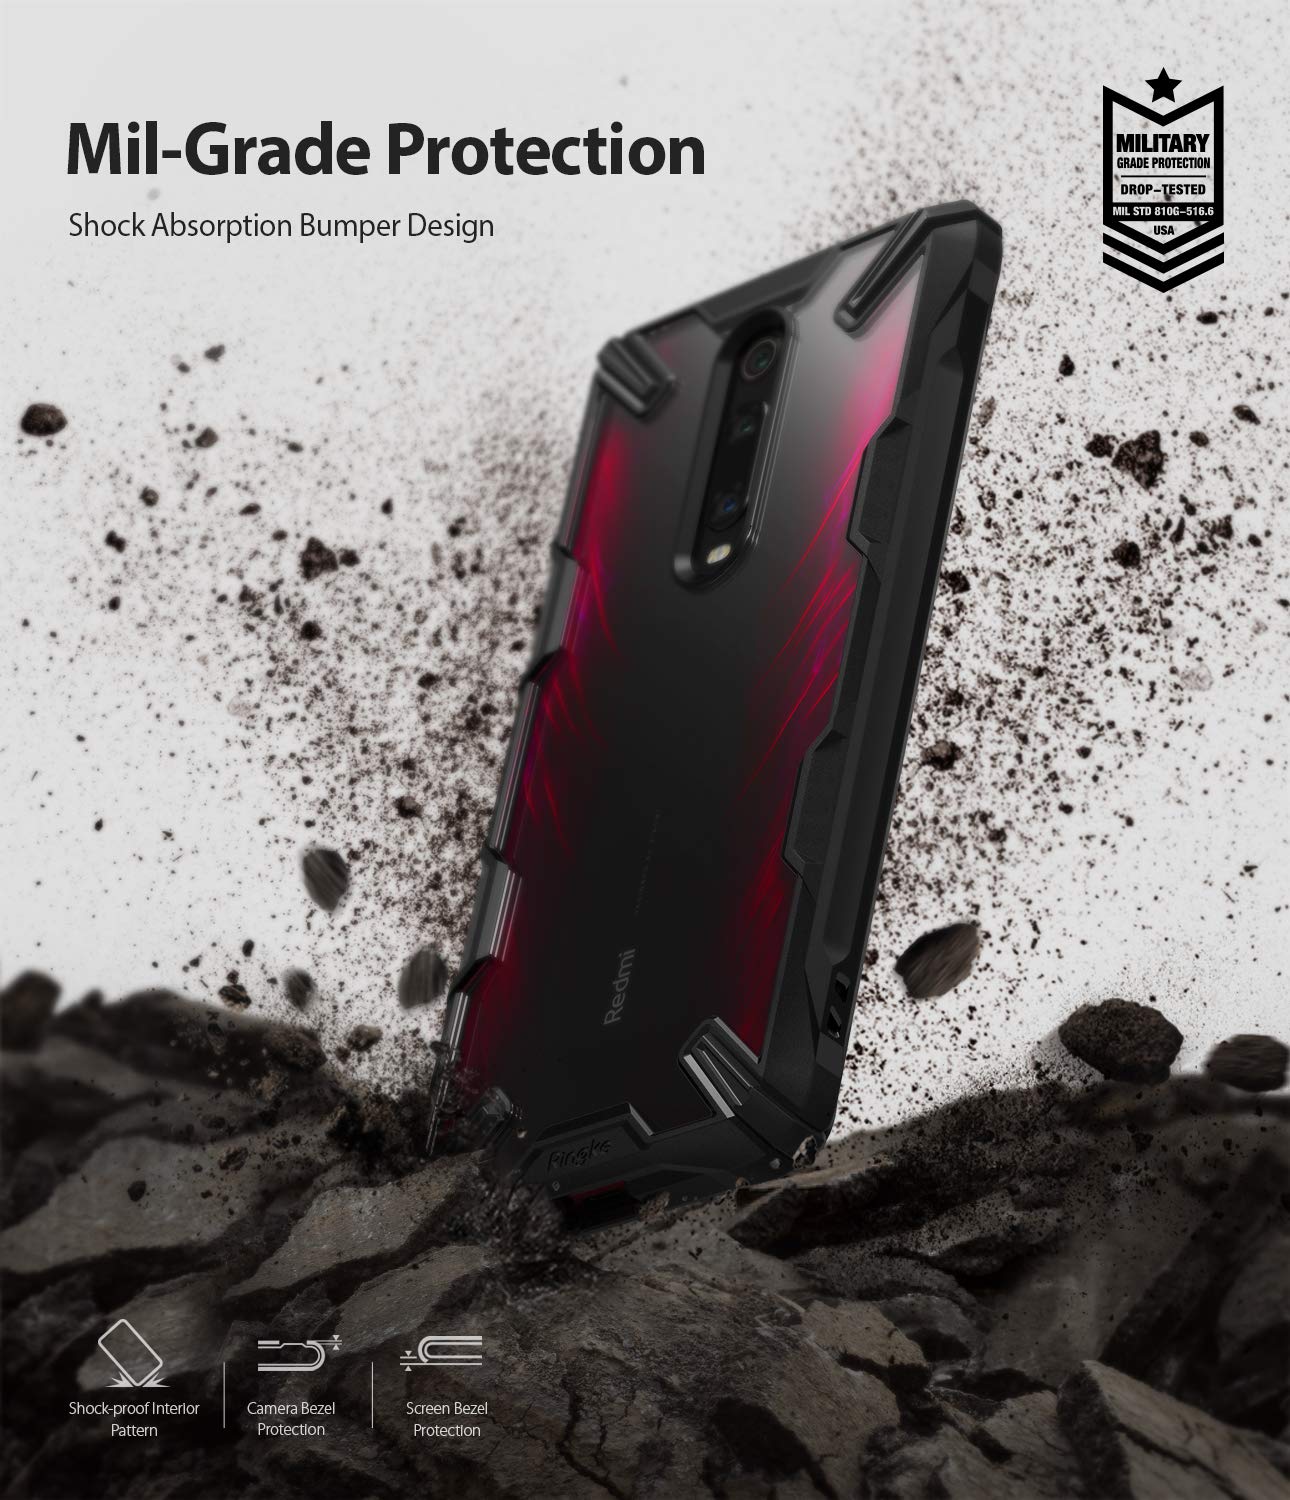 military grade protection - shock absorption bumper design